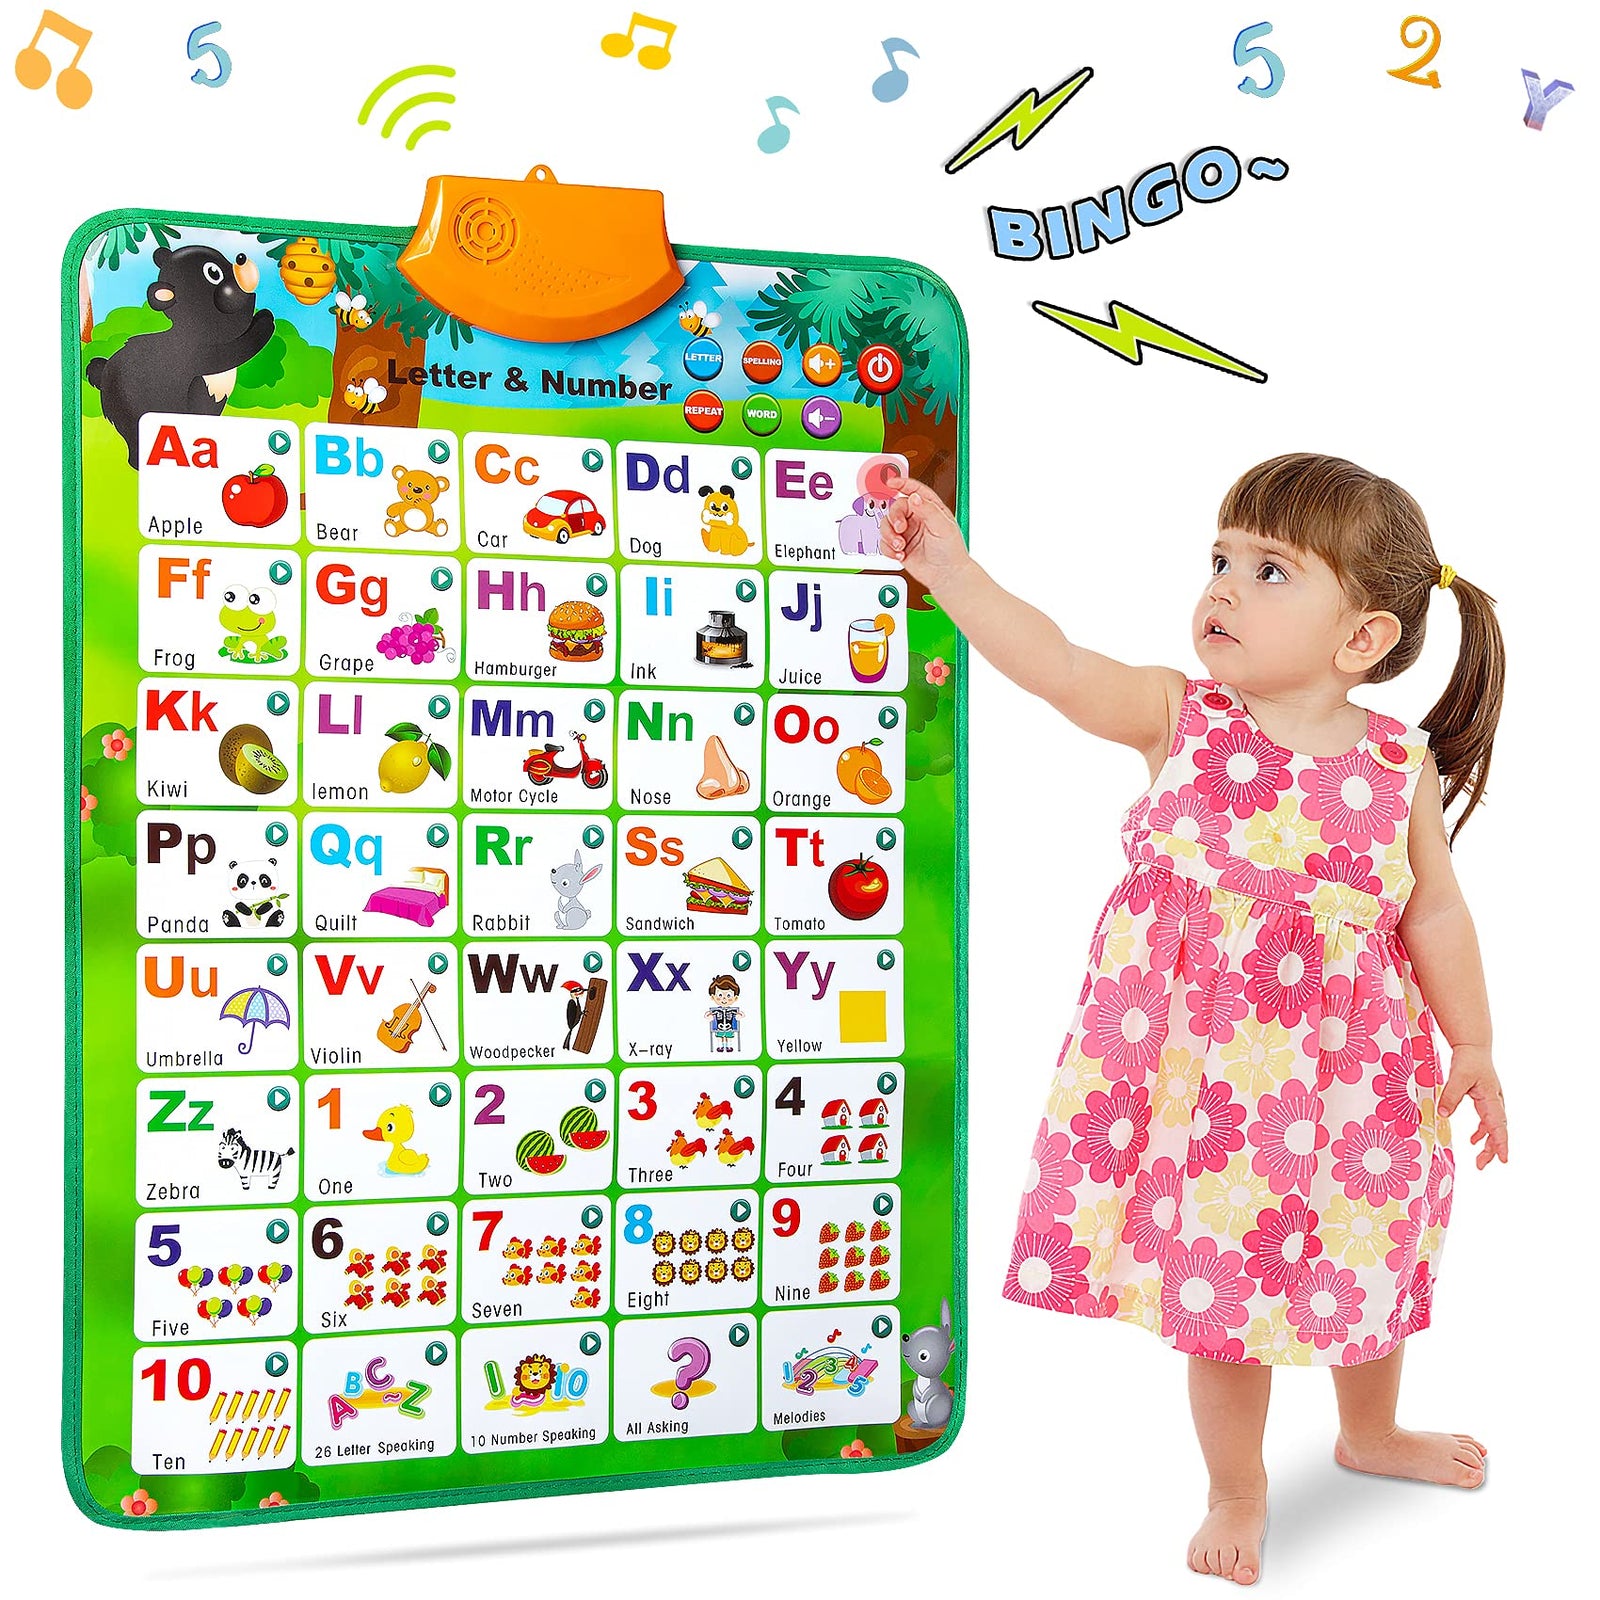 NARRIO Interactive Alphabet Wall Chart for Kids - Best Gifts